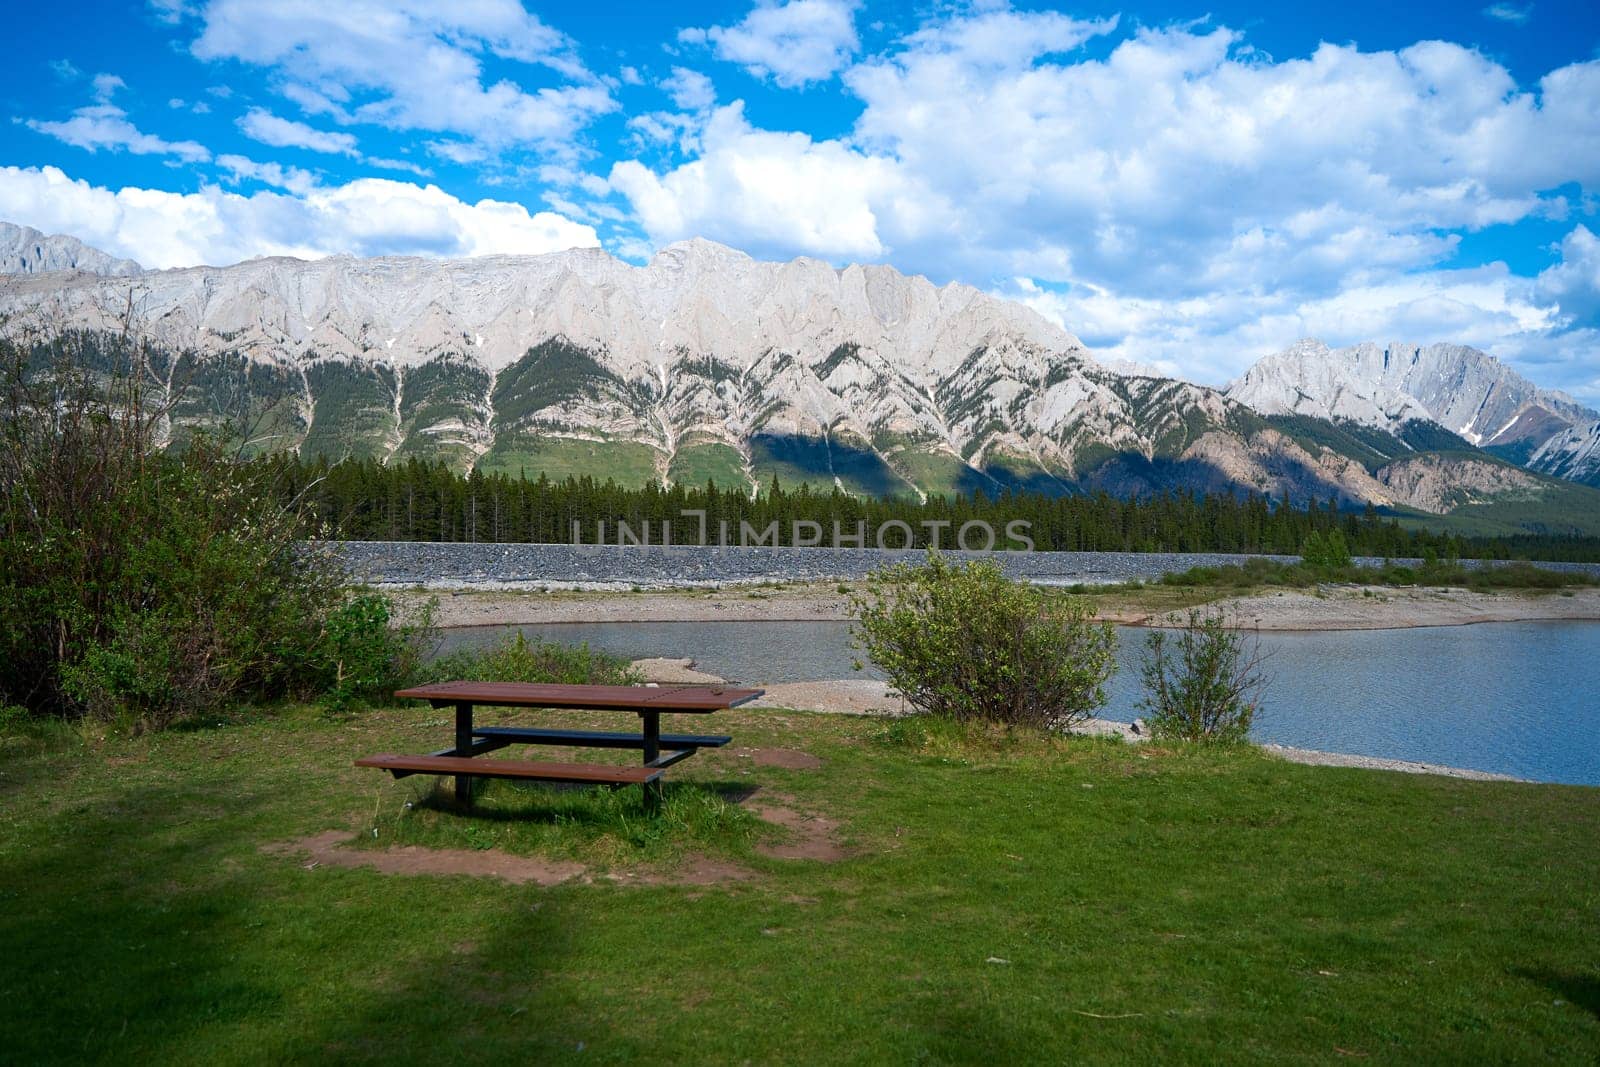 A picnic table on the edge of a lake overlooking the Canadian mountains in Alberta